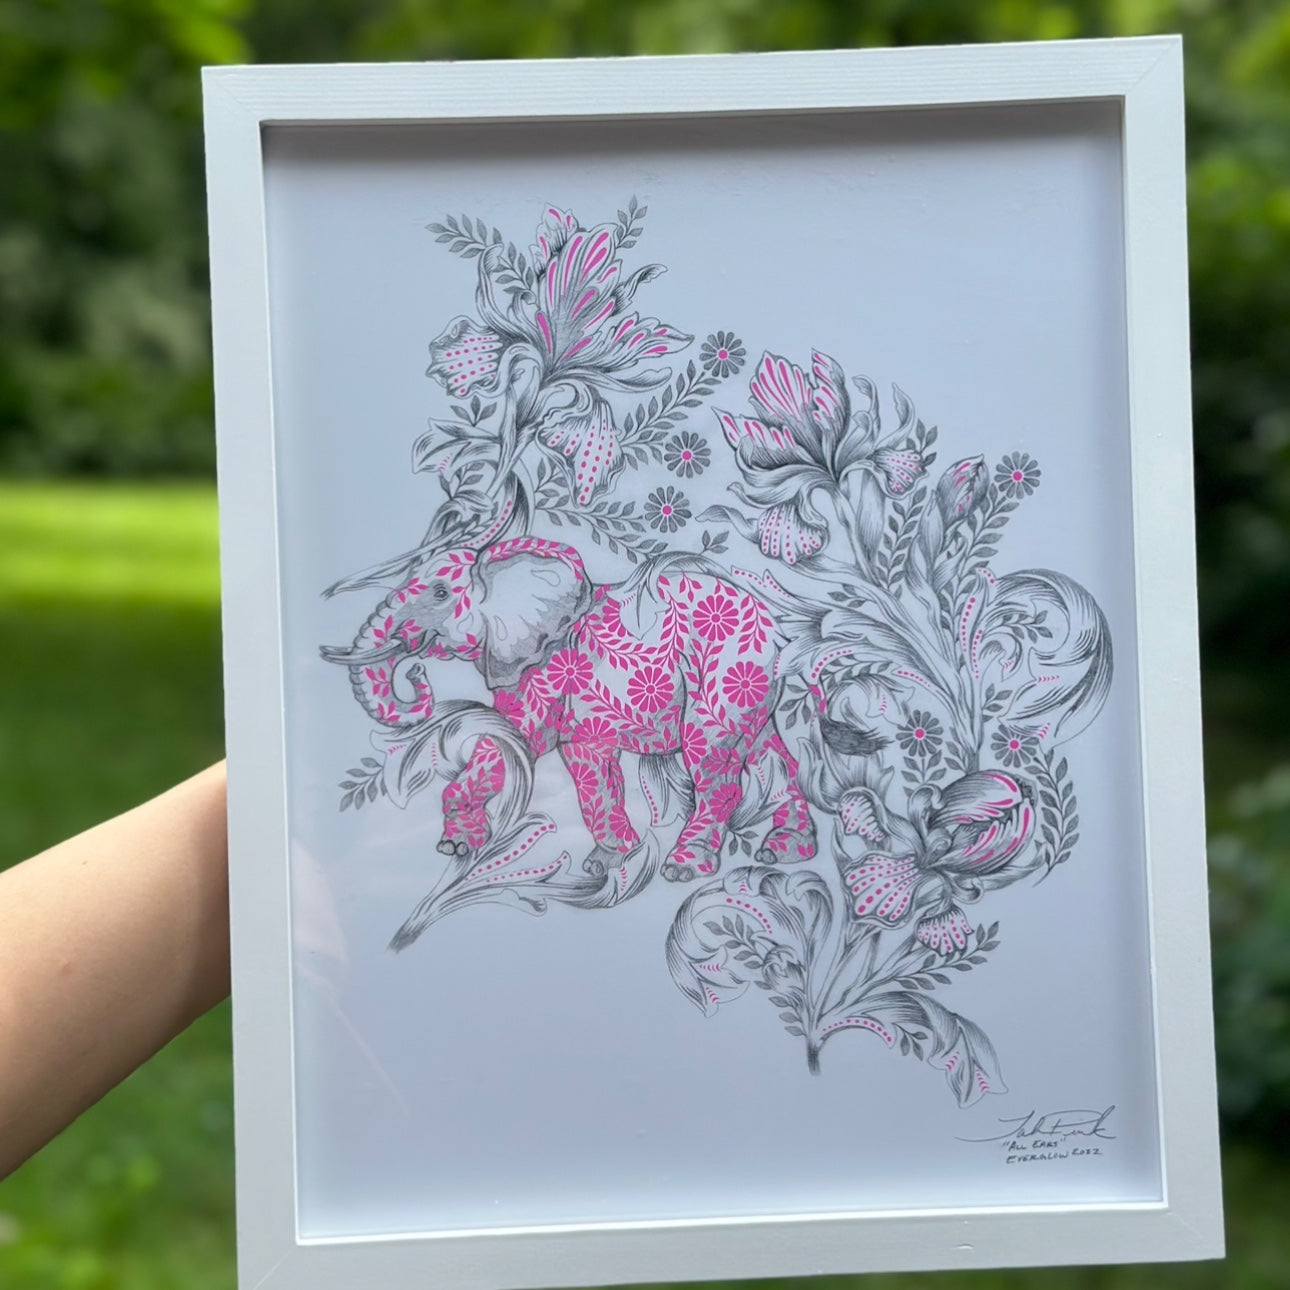 Single Everglow Art Prints - A #VeryRare Tula Pink Special Product!